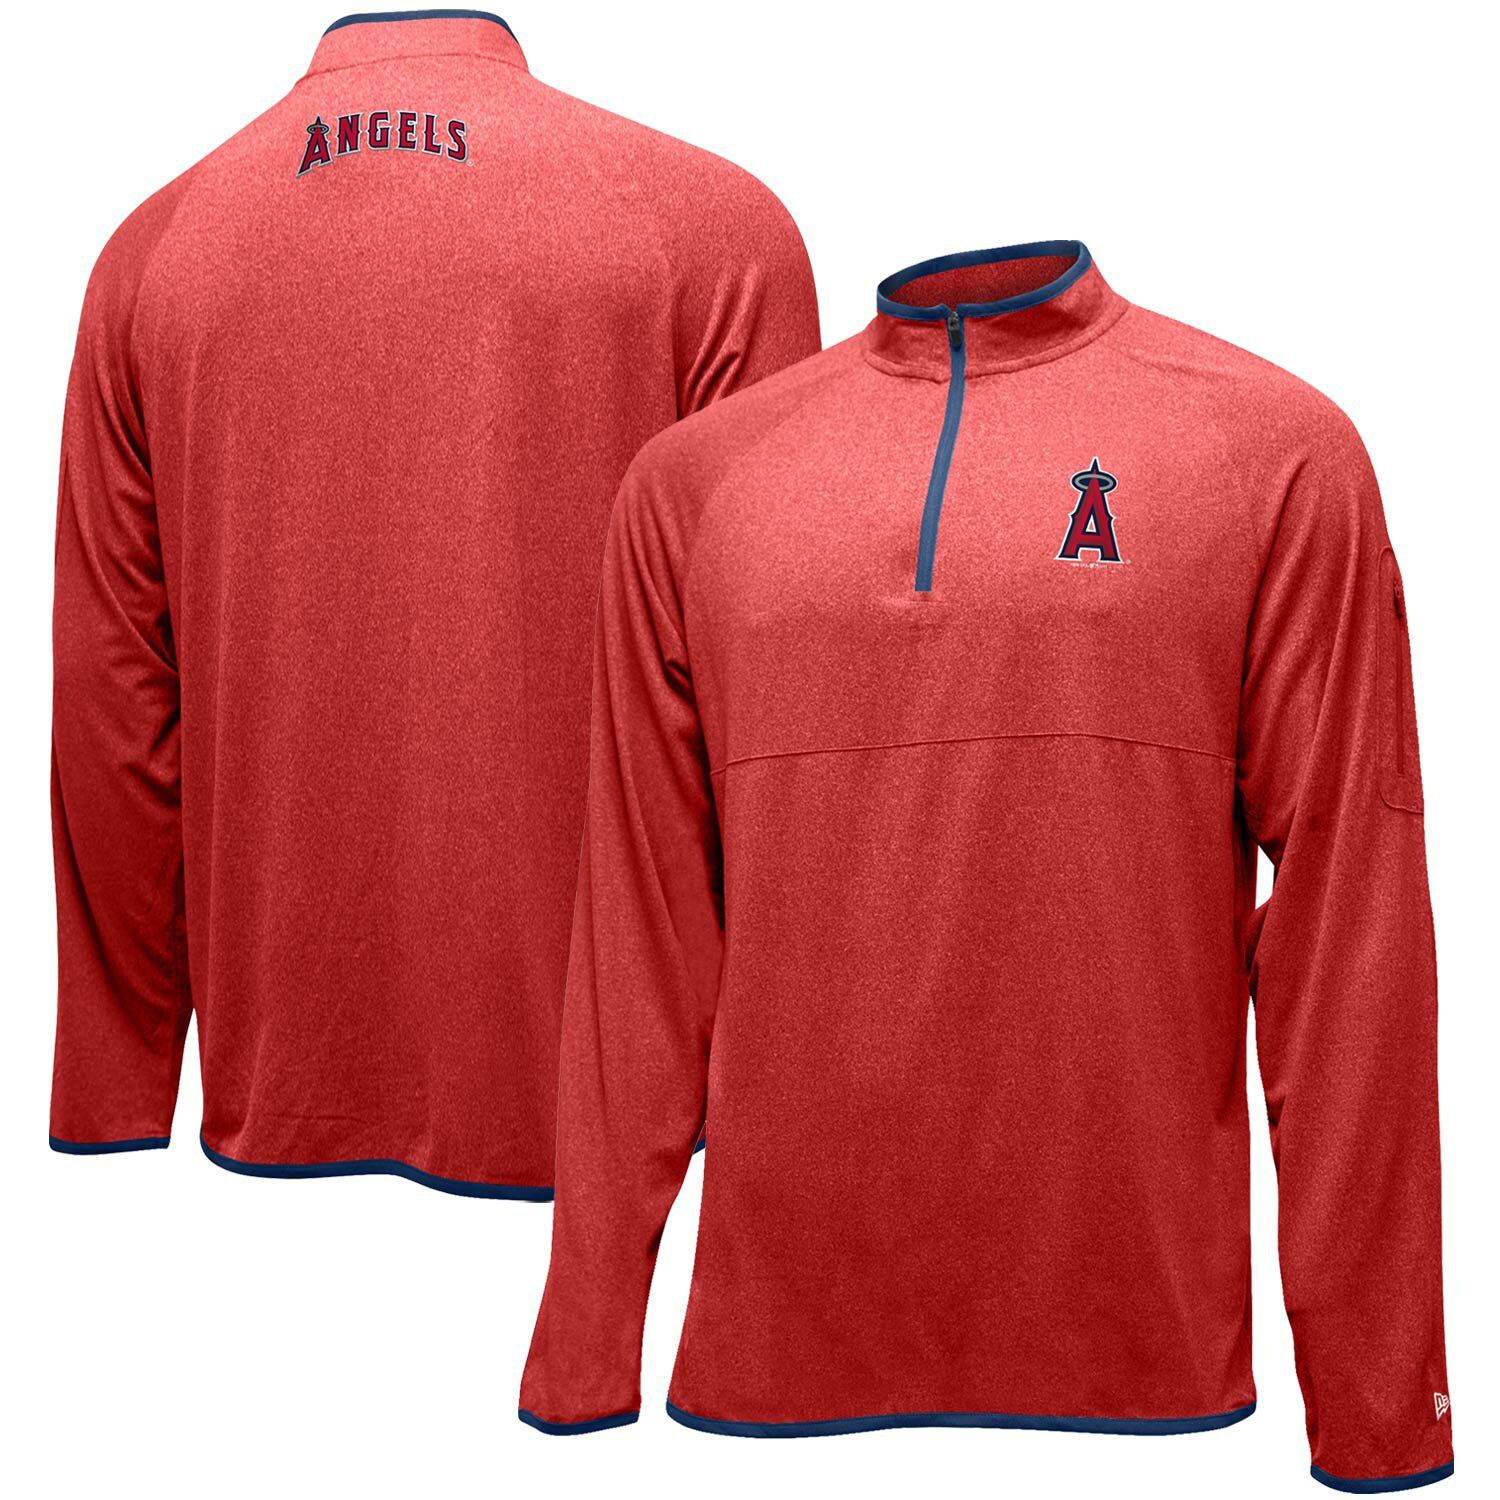 new angels jersey